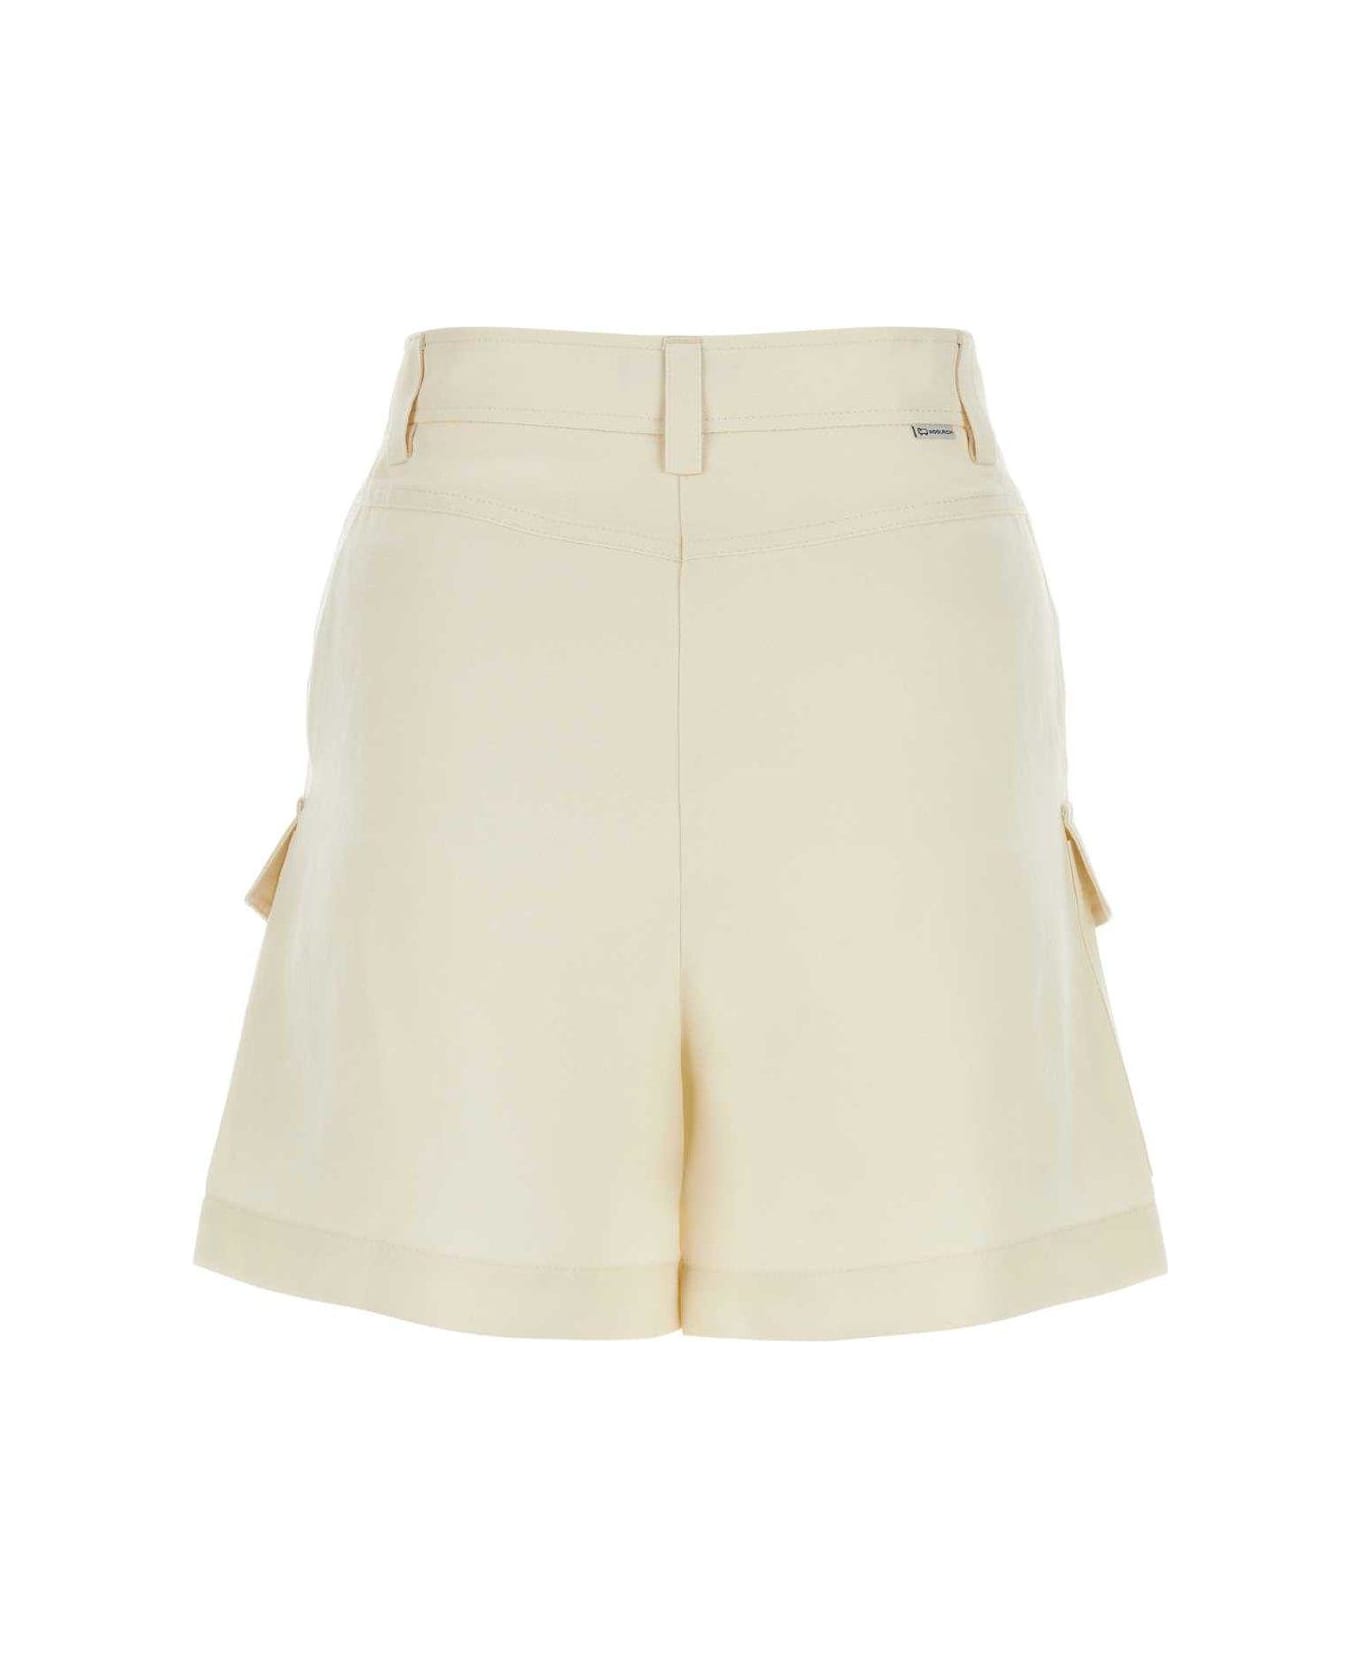 Woolrich Pleat-detailed Shorts - White ショートパンツ